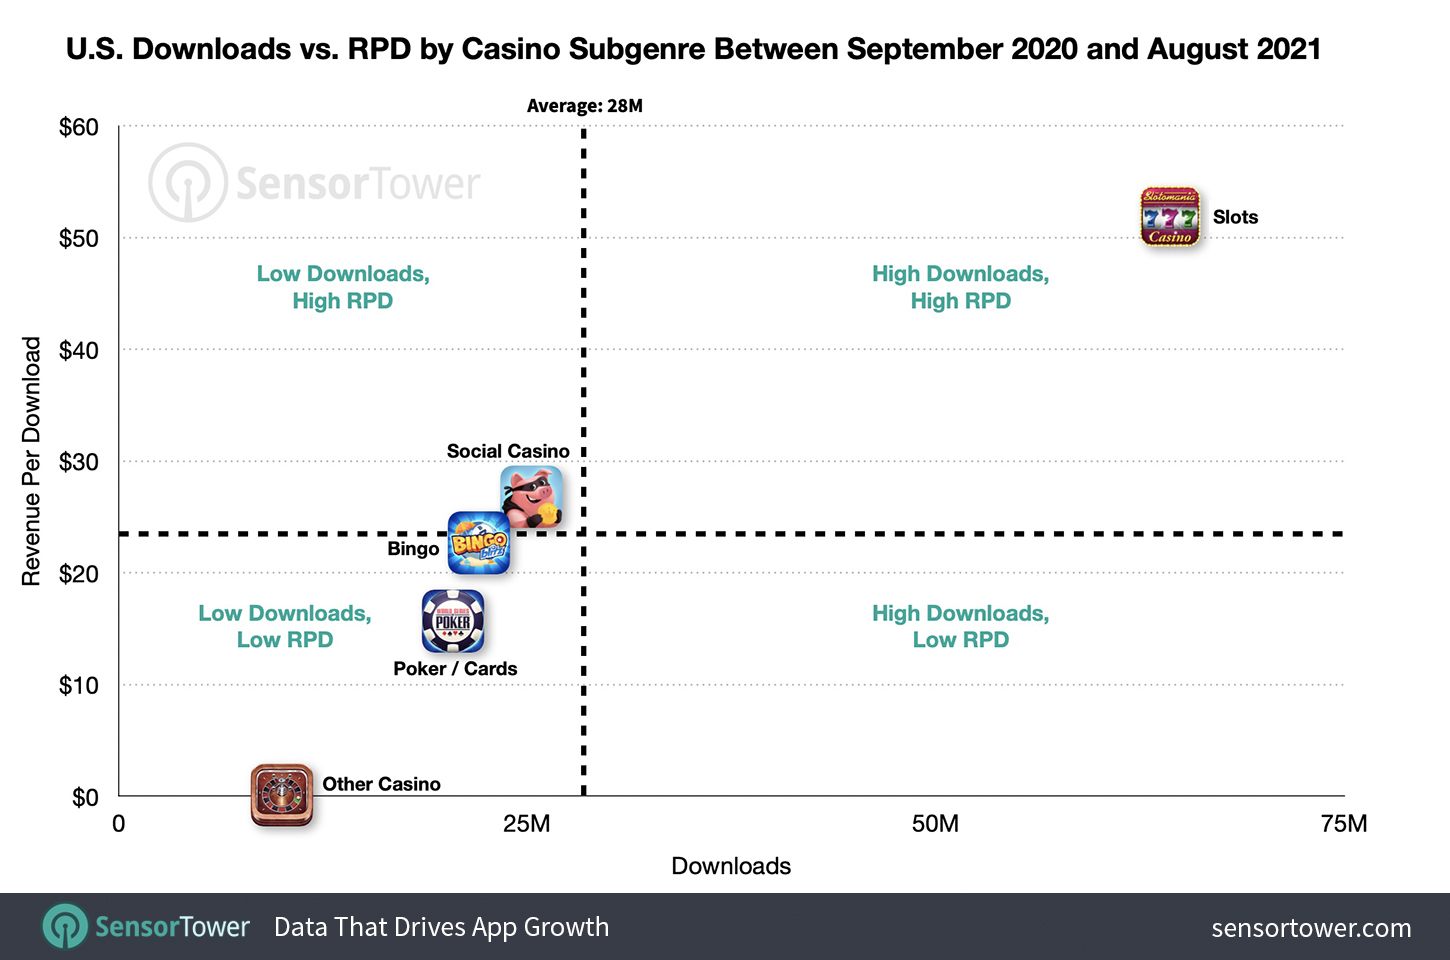 U.S. Downloads Vs. RPD by Casino Subgenre Between September 1, 2020 and August 31, 2021